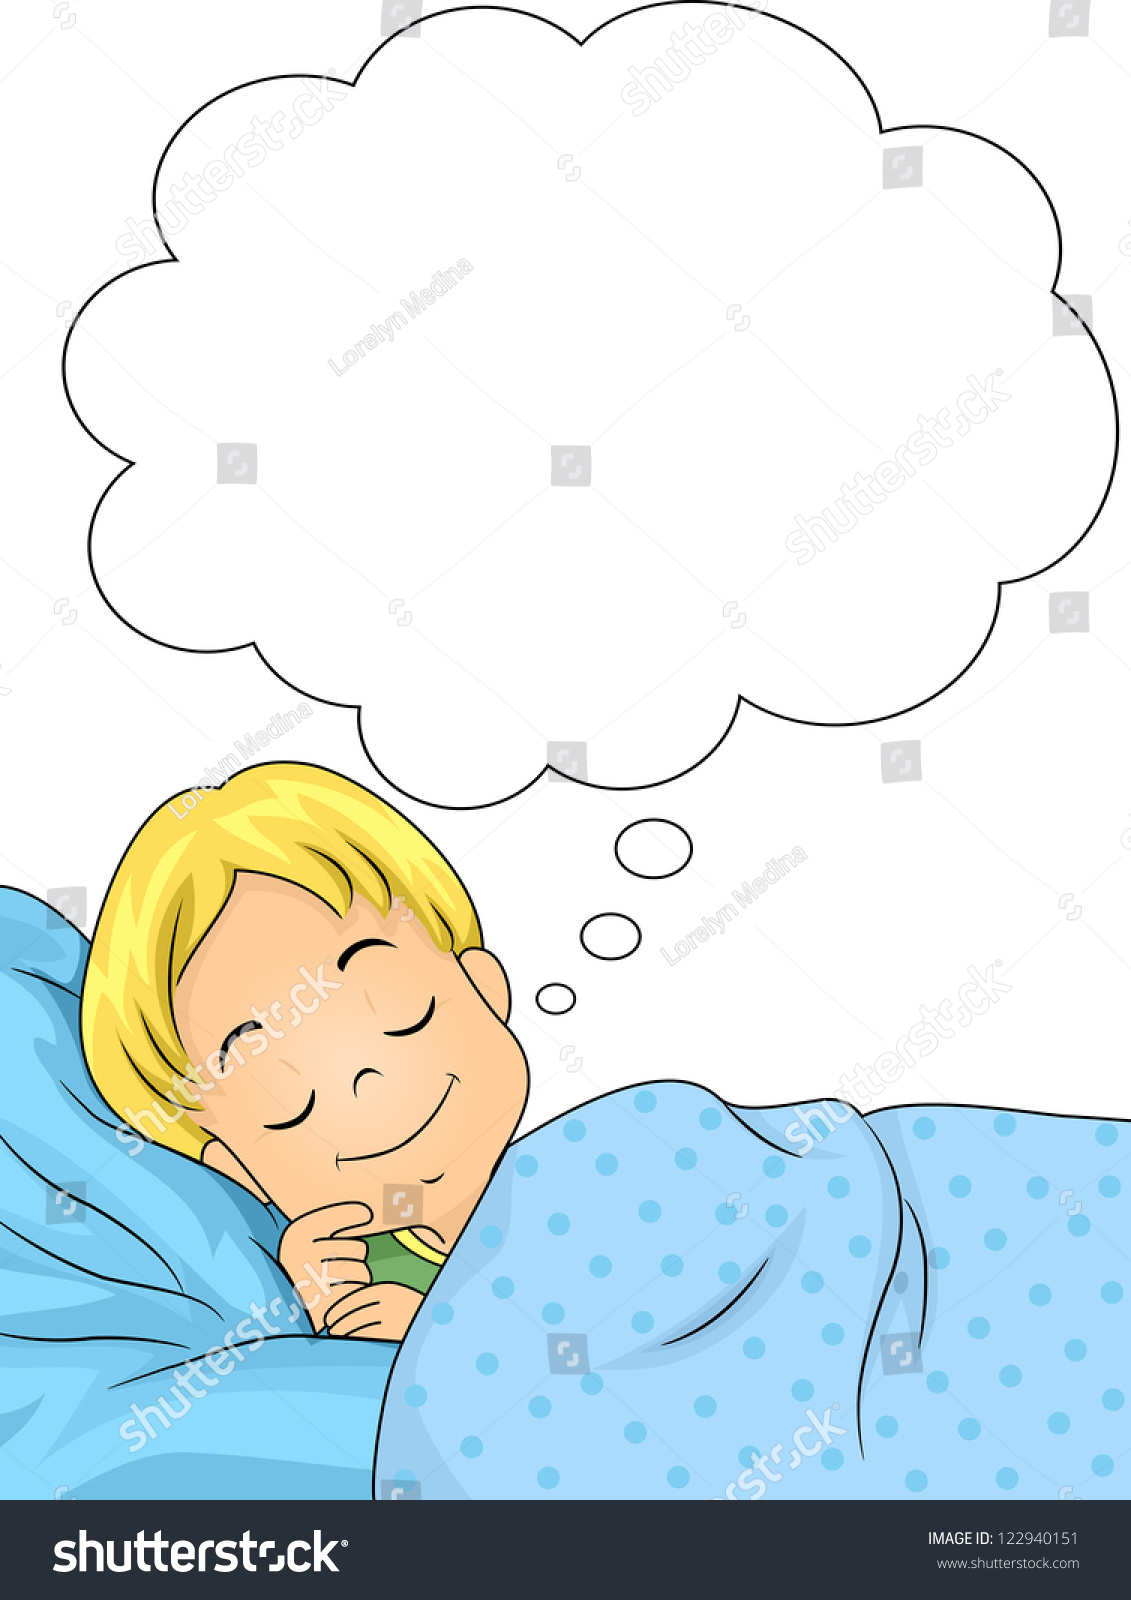 Illustration Of A Dreaming Boy With A Smile On His Face - 122940151 ...